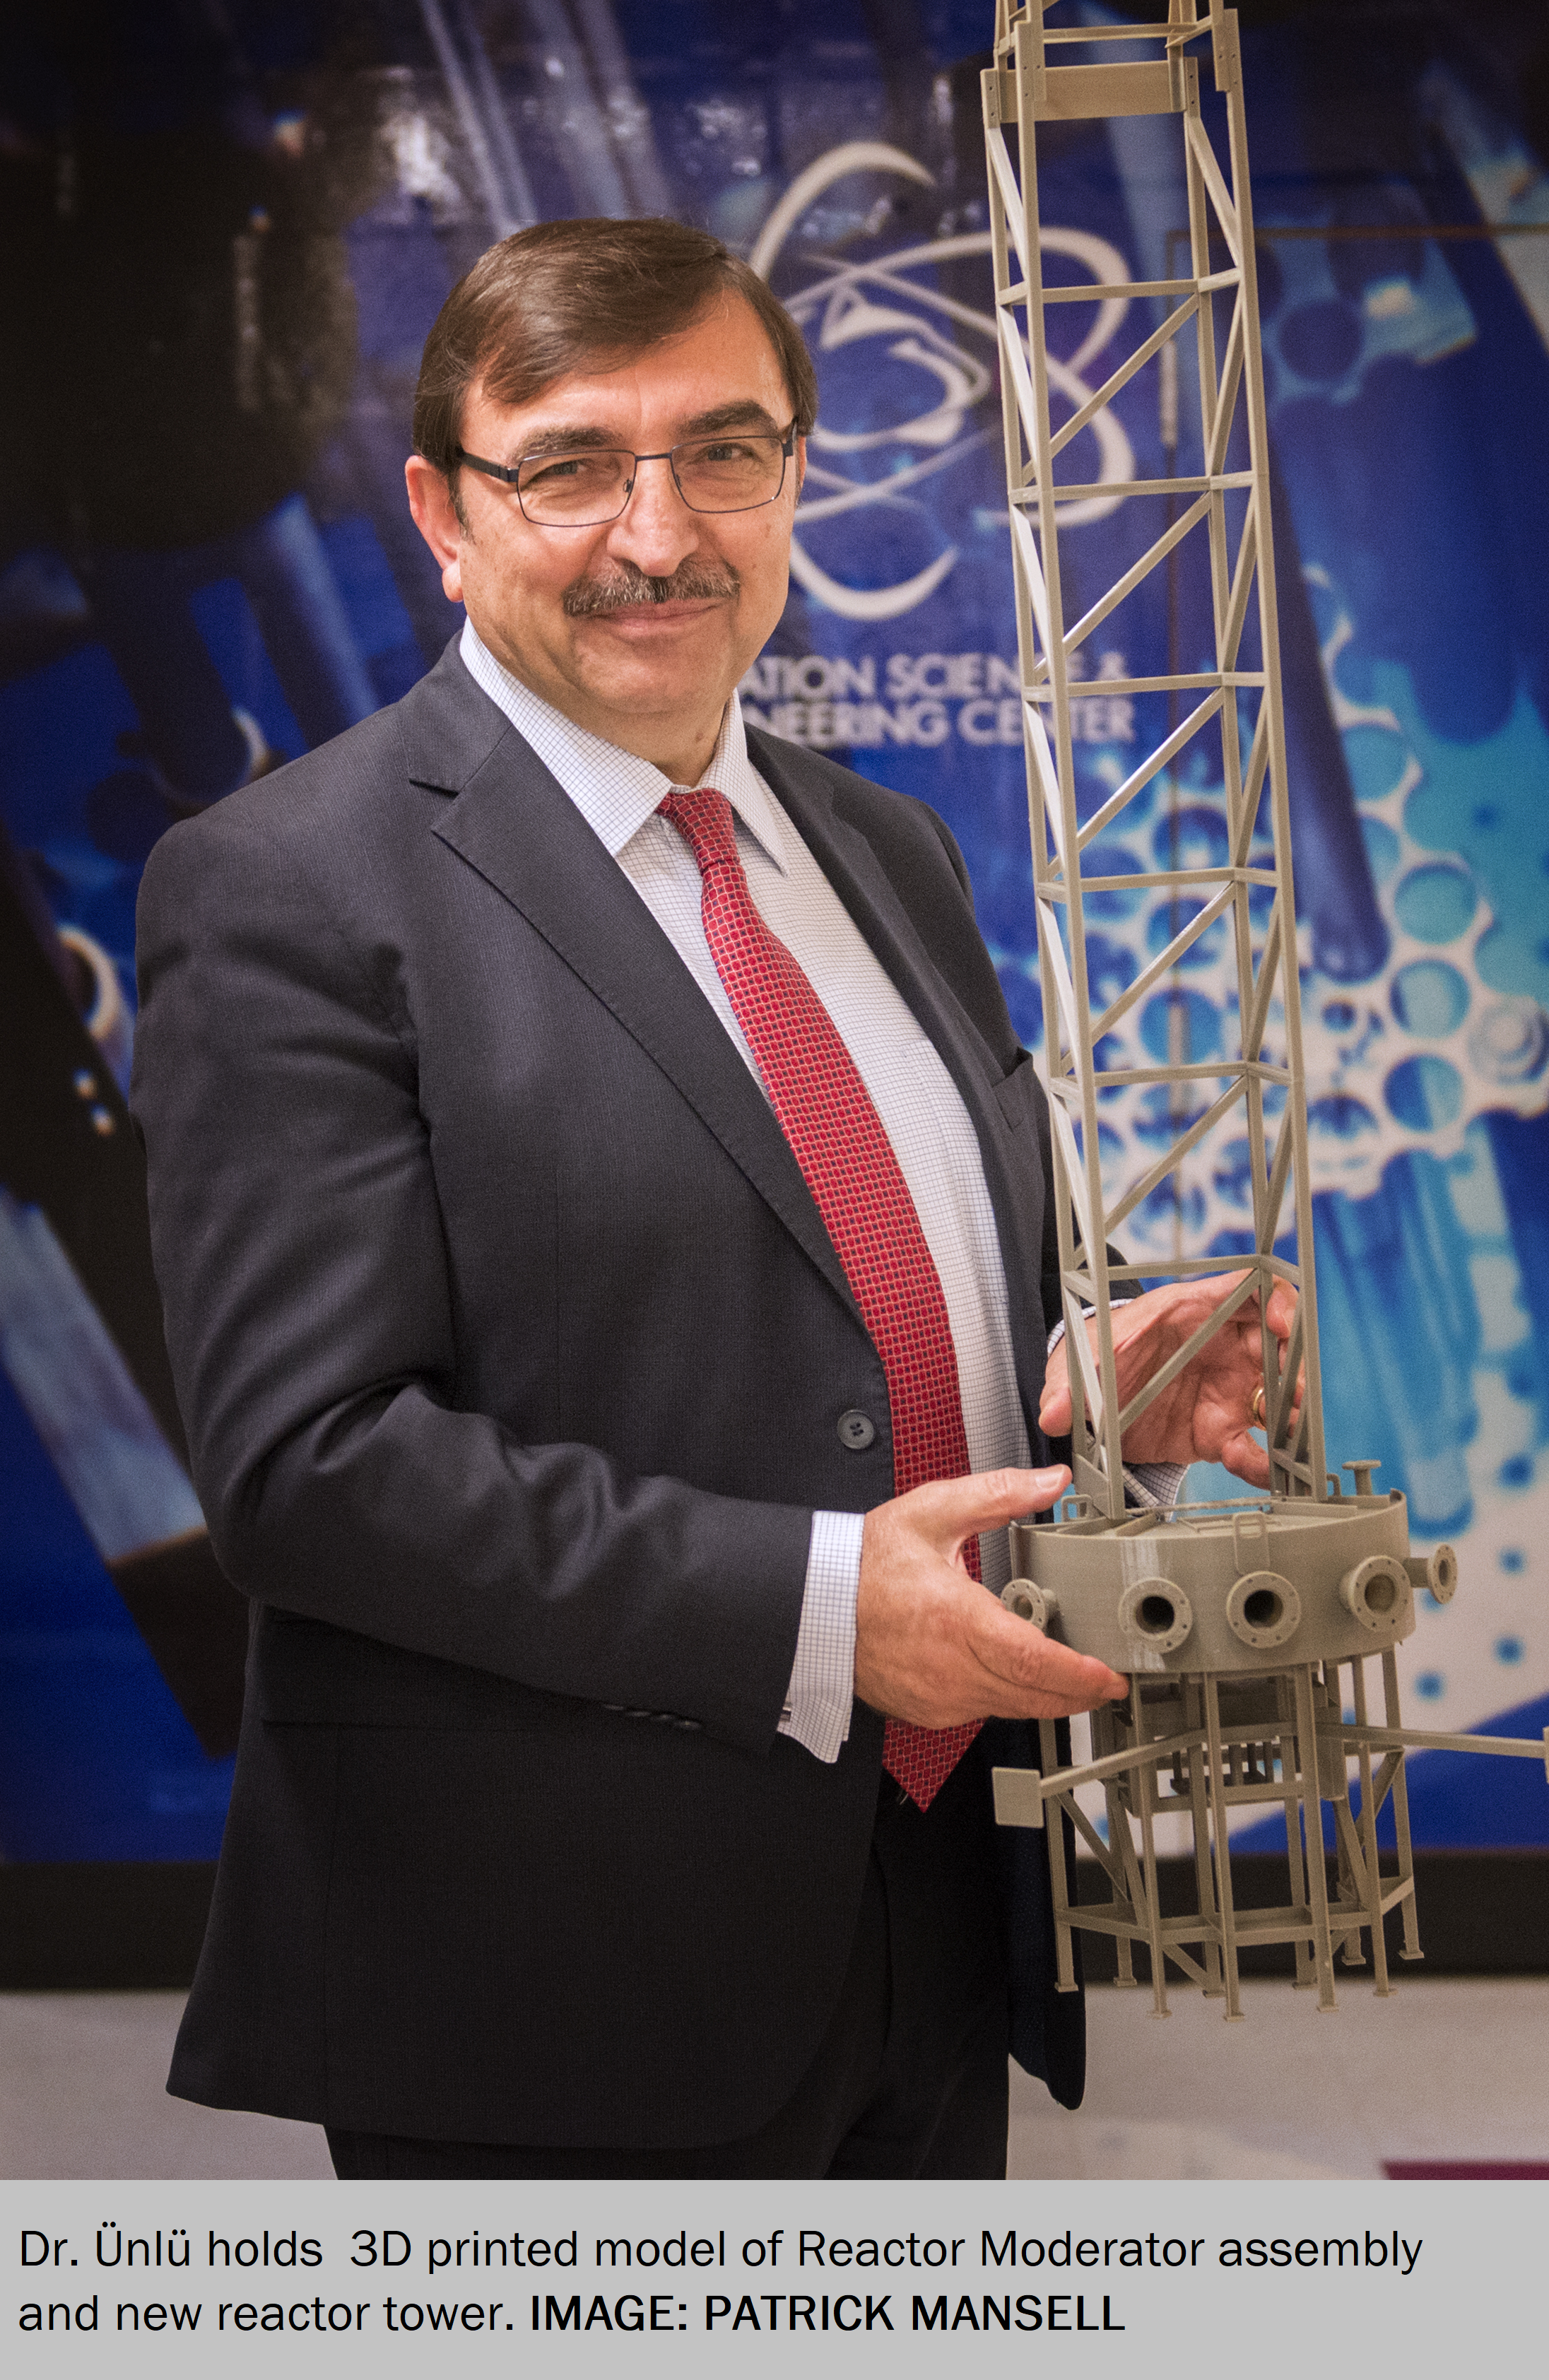 Dr. Unlu stands with a model of the new heavy water reflector